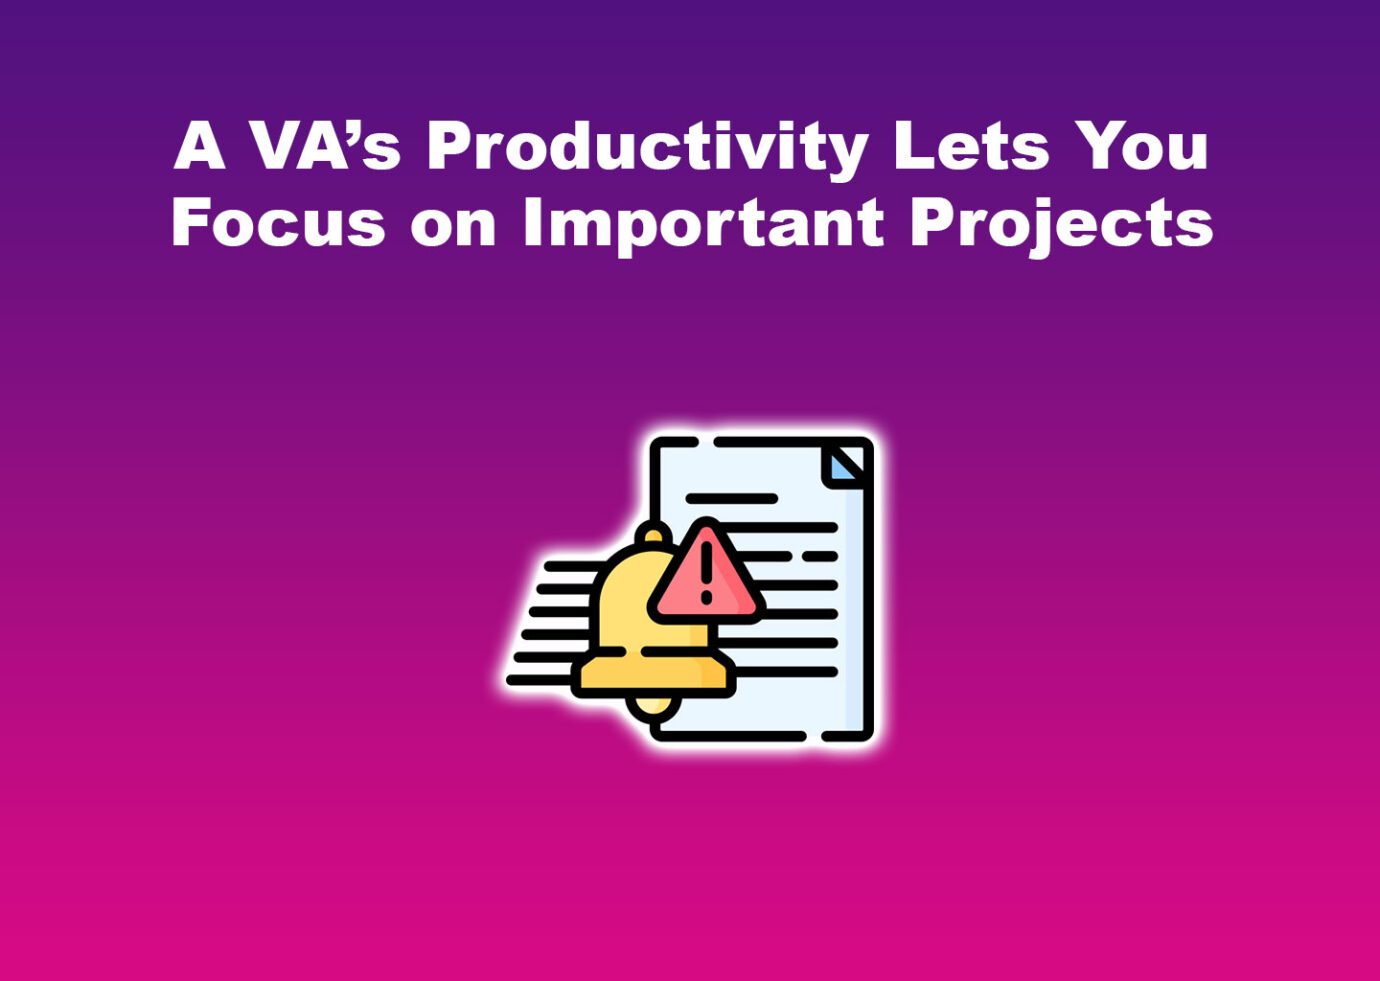 A VA’s Productivity Lets You Focus on Important Projects